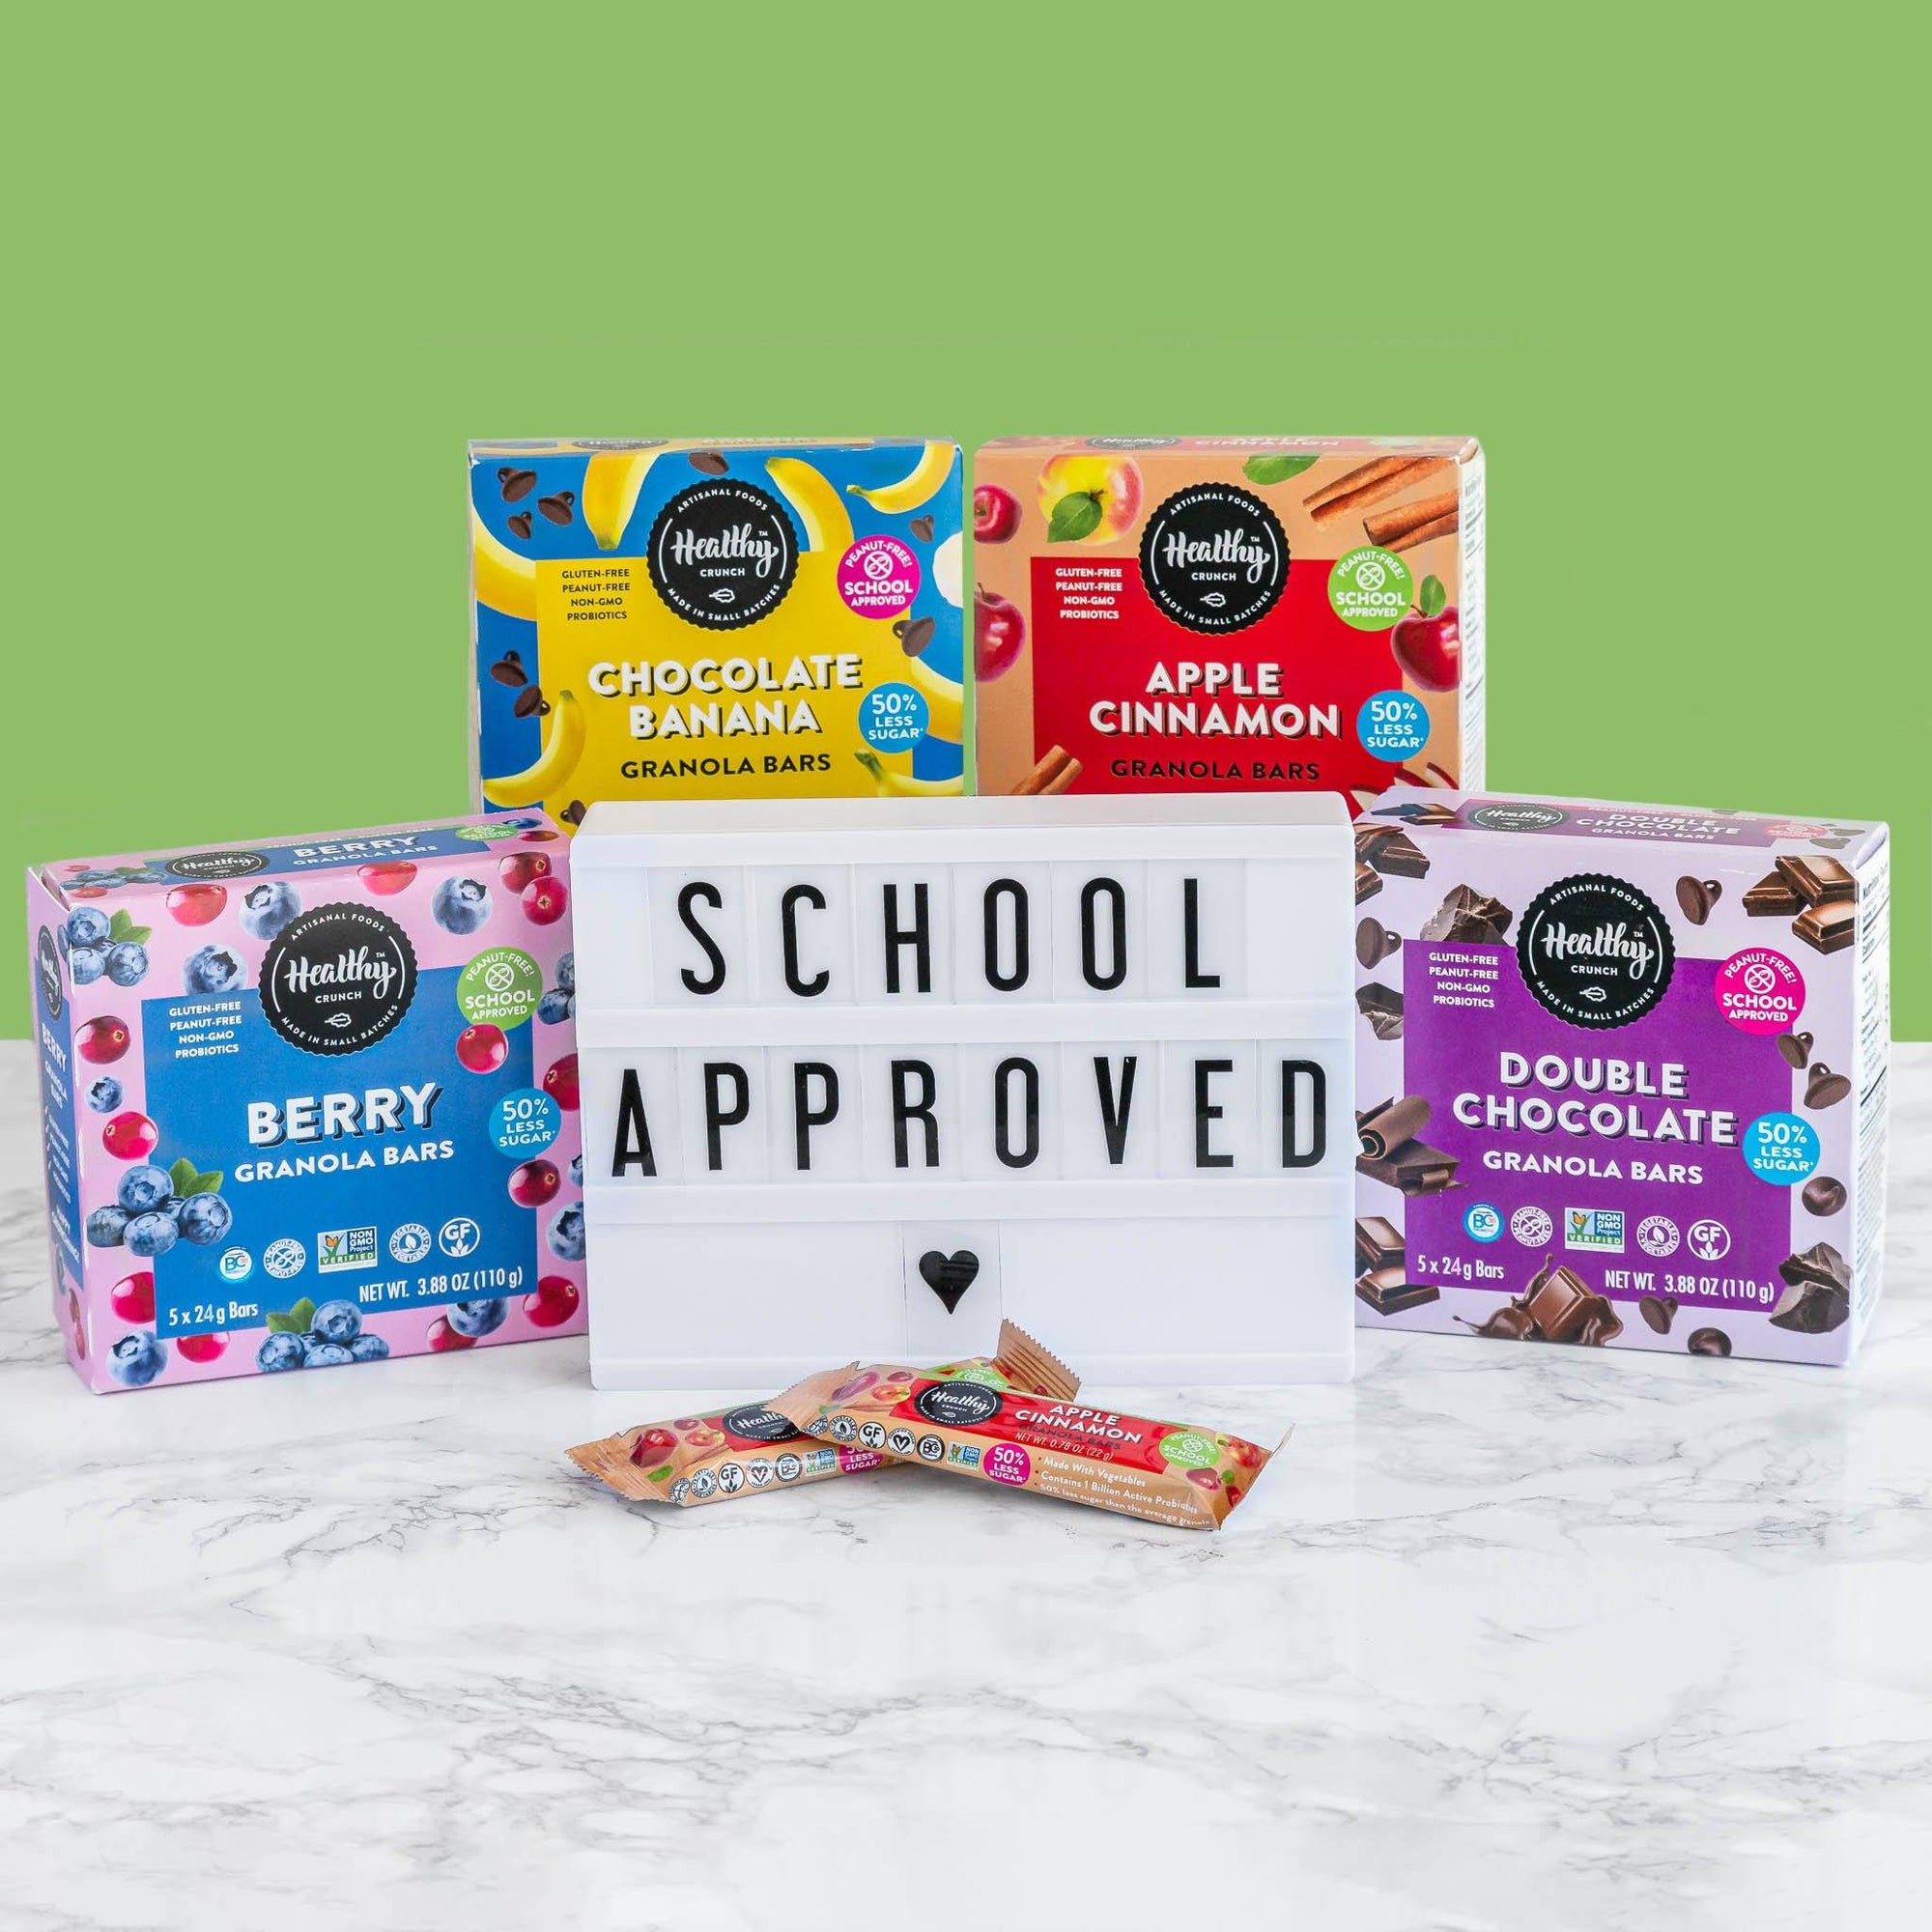 Healthy Crunch launches first ever School Approved® snack line